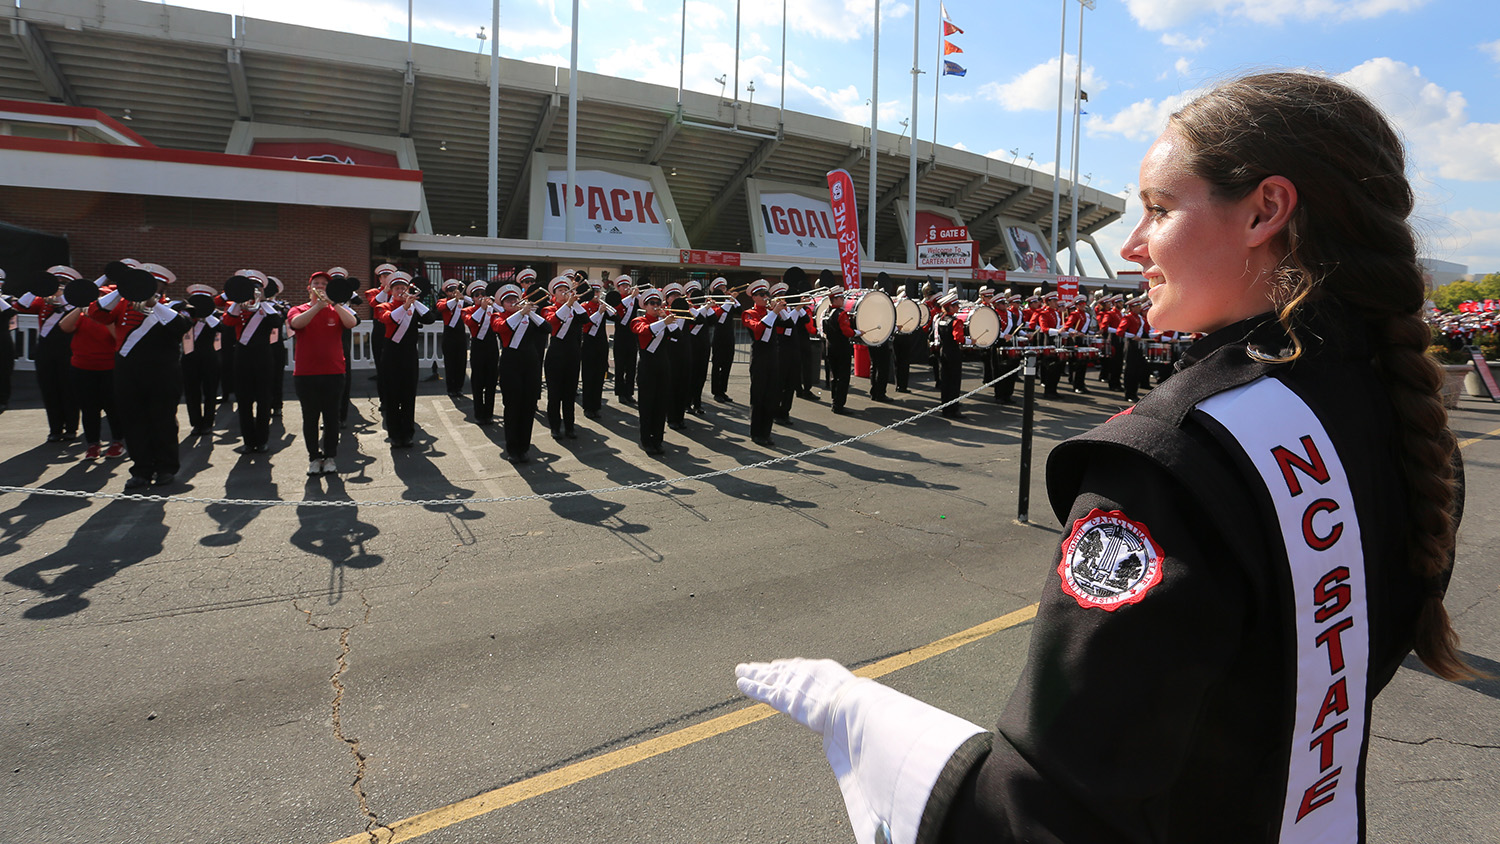 Laura Dugan faces the marching band with hands raised to conduct